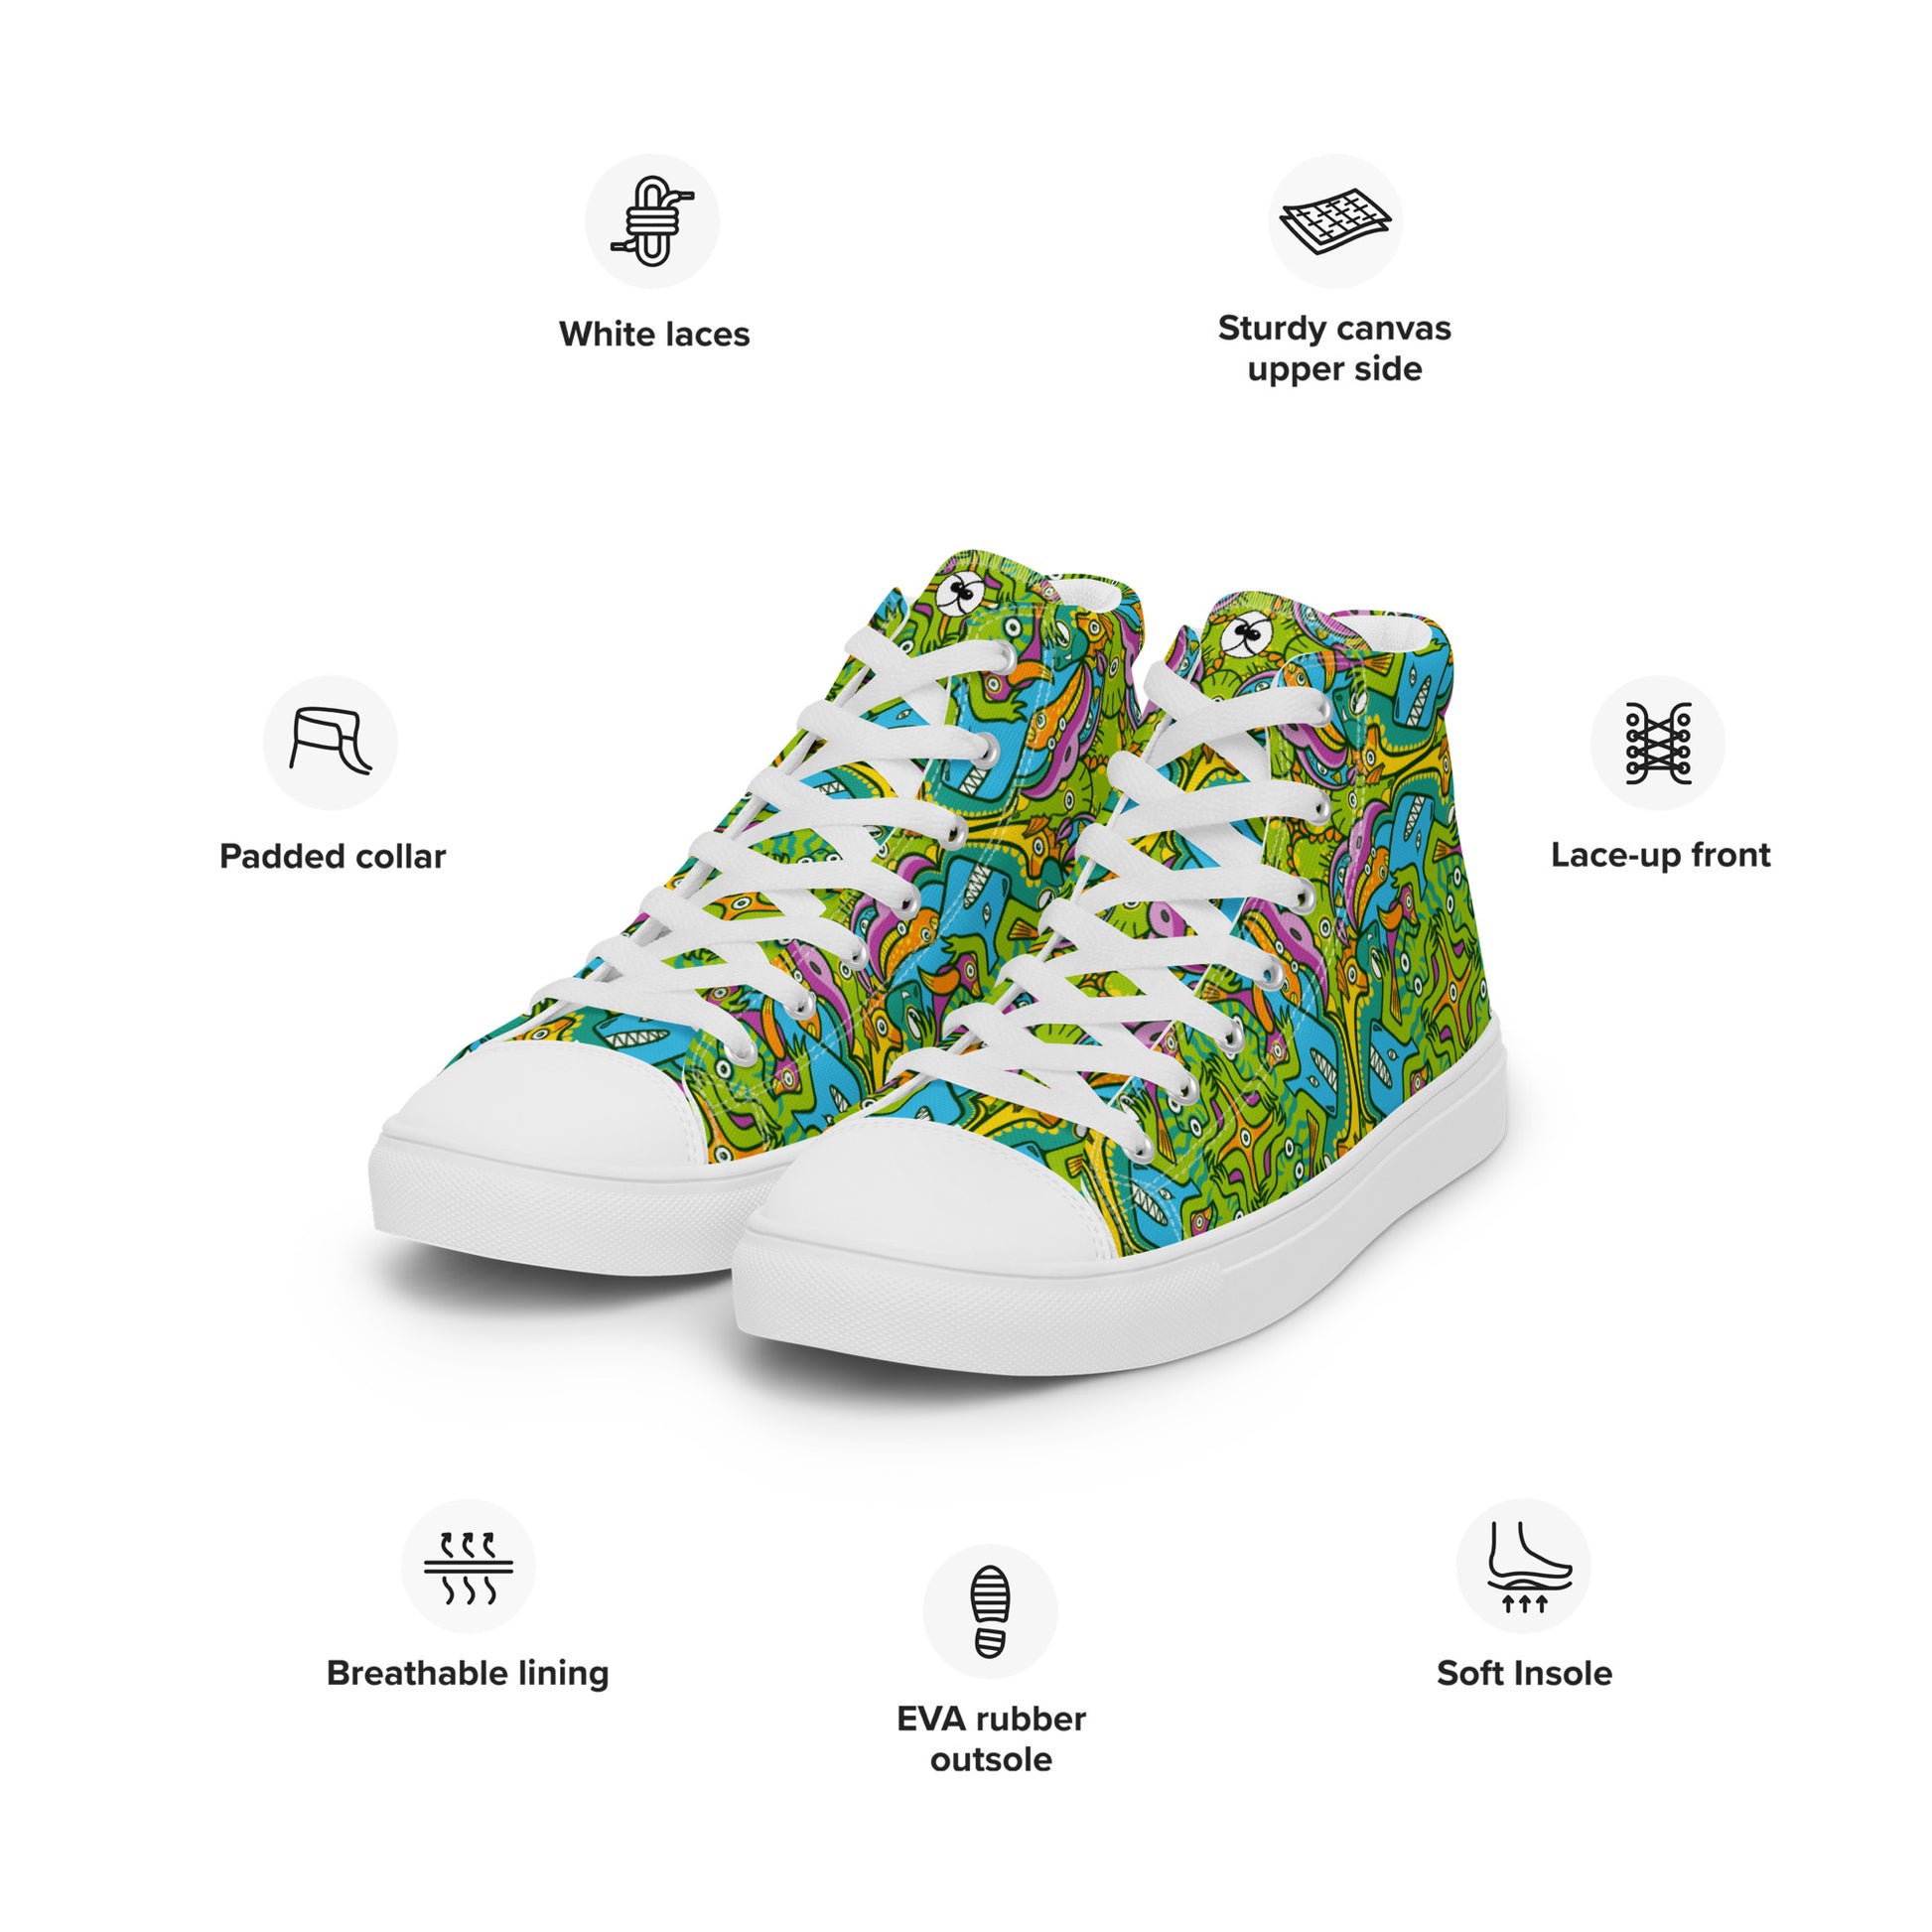 To keep calm and doodle is more than just doodling Men’s high top canvas shoes. Specifications